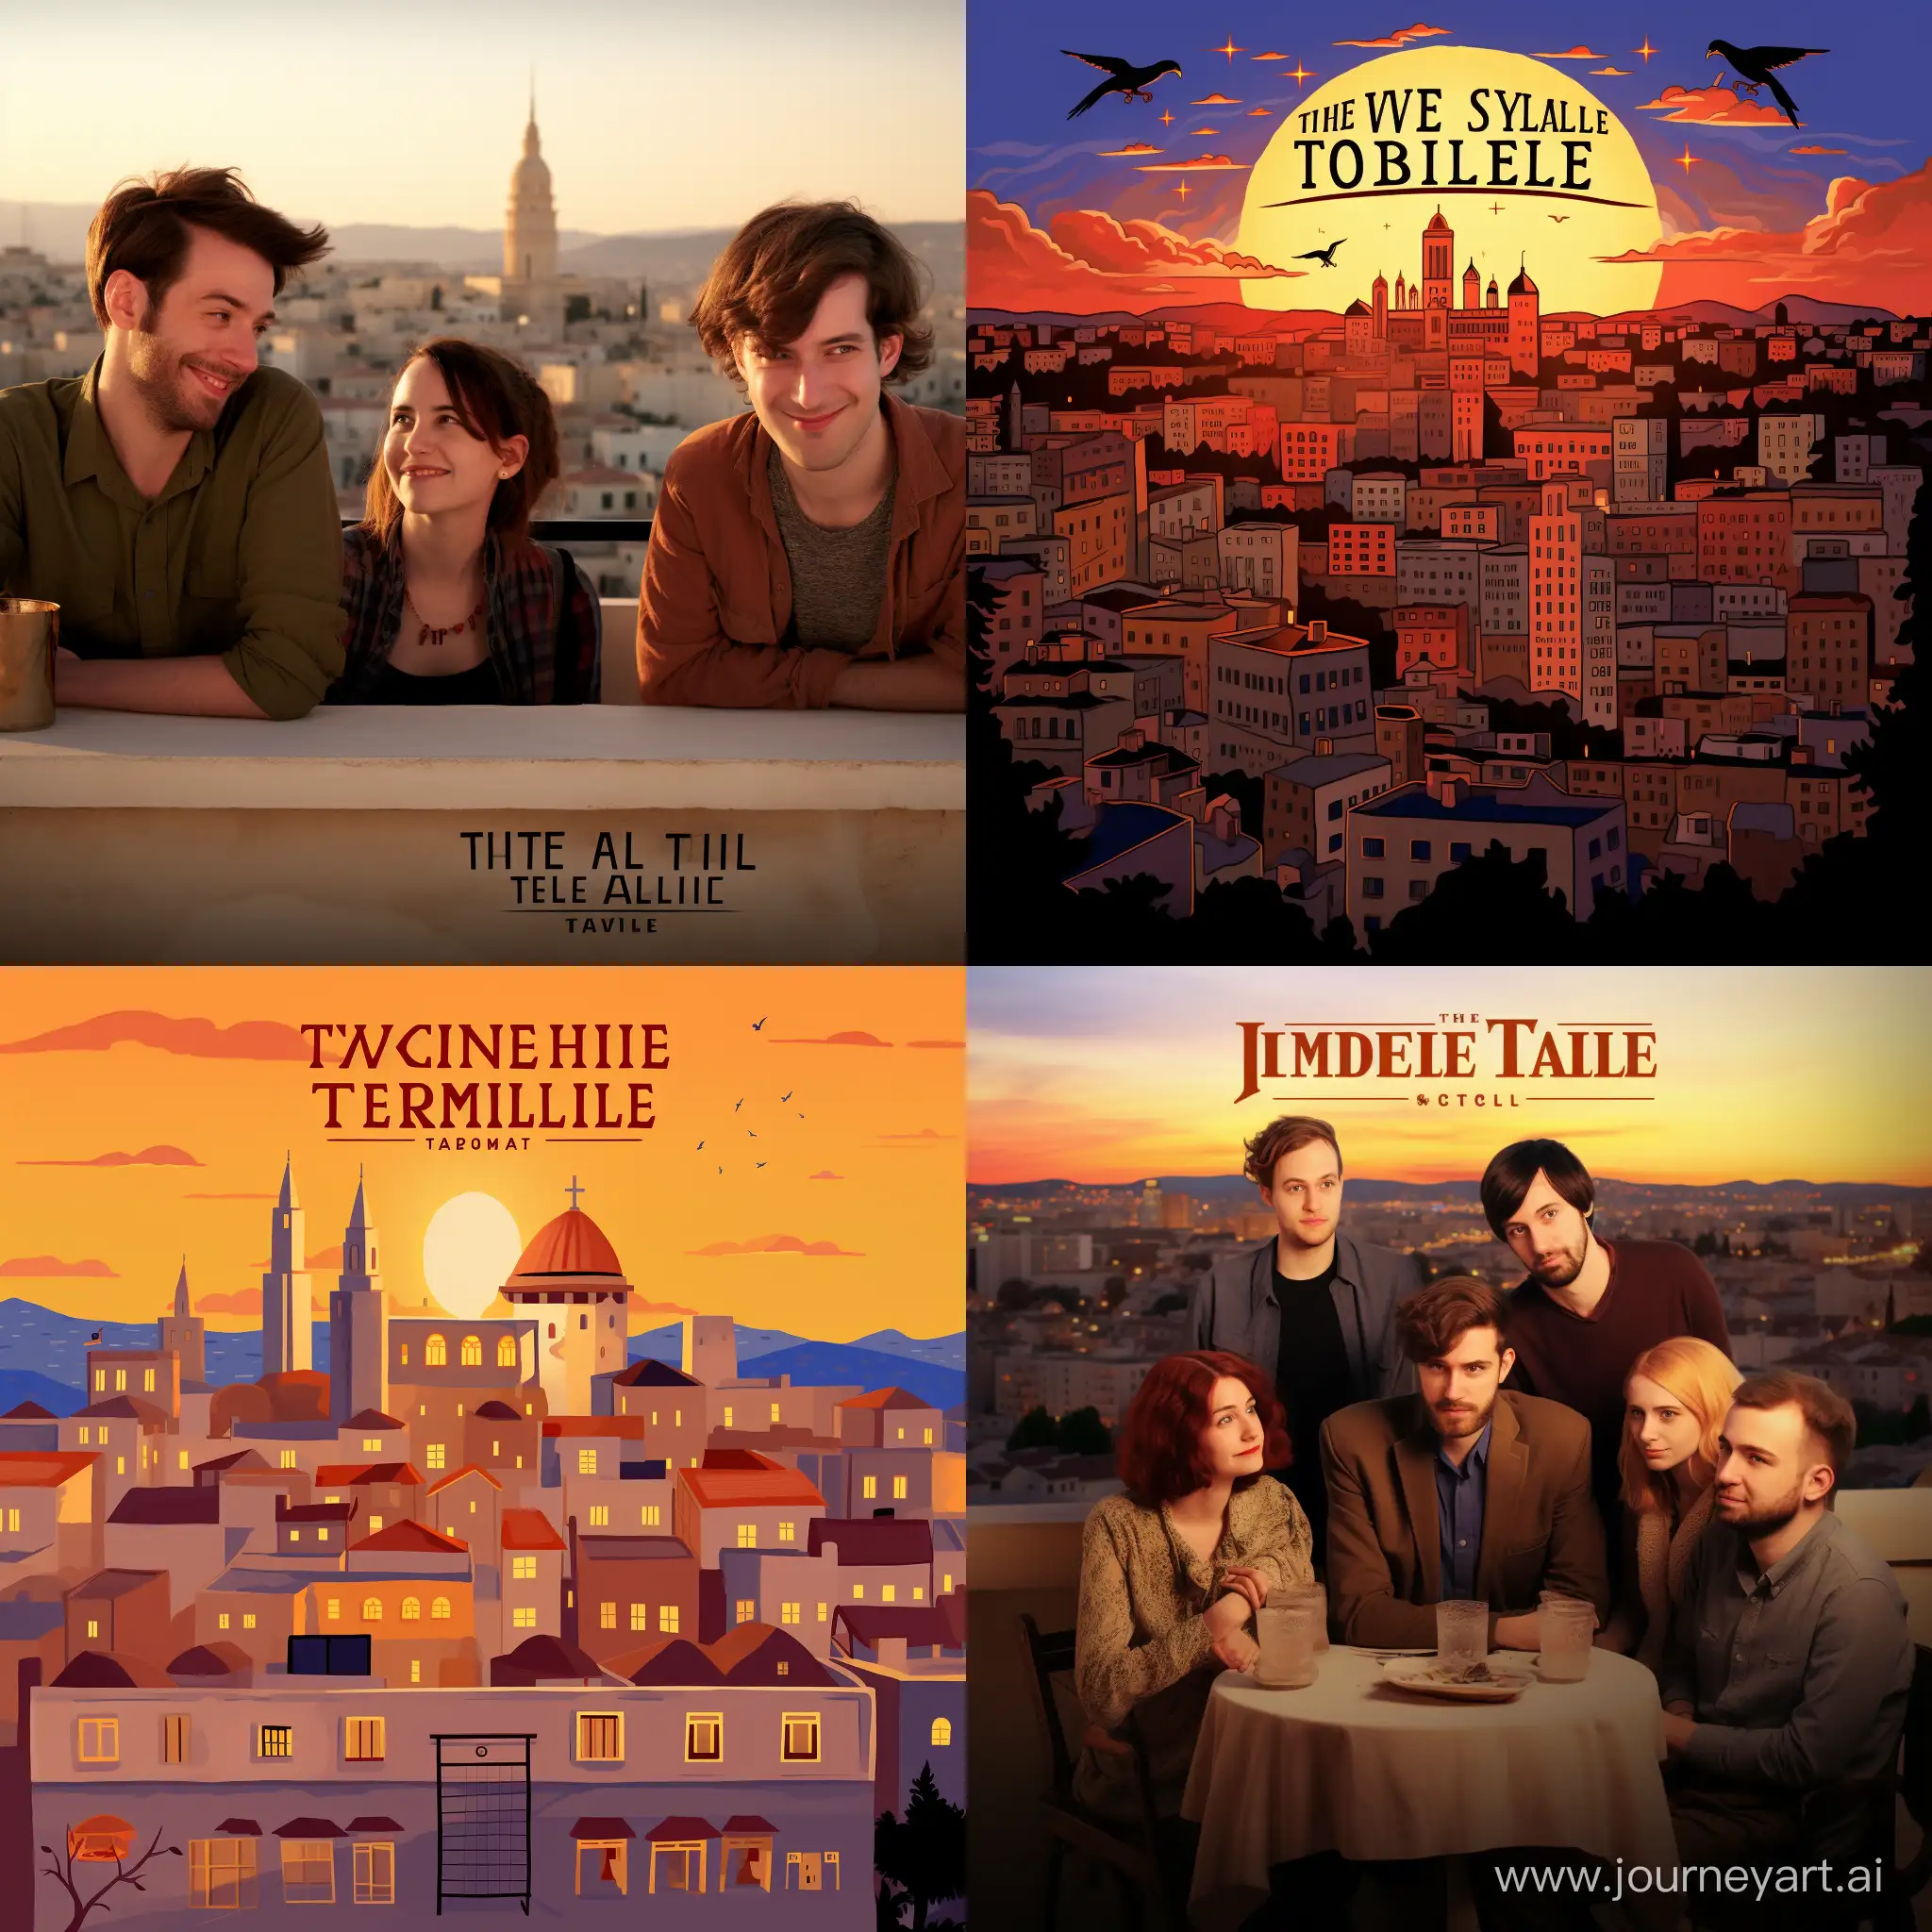 
Create an Indie American Comedy Movie Poster

Title: "Twilight Tales"

Genre: Indie American Comedy

Visual Style:

A rooftop terrace overlooks the captivating old city of Jerusalem during a vibrant sunset, emphasizing warm, golden hues.
Characters possess expressive faces and diverse appearances, hinting at their personalities.
Subtle whimsical elements should be integrated into the scene.
Main Characters (Brief descriptions for reference):

A spirited, unconventional 28-year-old woman wearing a unique pine-shaped bachelorette cock antenna headband.
Three lively, early 30s female friends radiating joy and camaraderie.
A charming, approachable 20-year-old male cleaning worker with a friendly demeanor.
Two warm and kind elderly ladies enjoying the moment.
Key Elements to Include:

The four women lounging on comfortable terrace loungers beside a luxurious rooftop swimming pool against the stunning Jerusalem skyline during sunset.
The group of friends should exude lively and joyful energy, contrasting with the slightly disinterested expression of the woman wearing the cock antenna headband.
In the background, the young cleaning worker handing towels to the two elderly ladies with a subtle exchange of smiles.
Text on the Poster:

"Twilight Tales" as the prominent title.
Tagline: "When the sun sets, unexpected stories unfold."
Optional: Credits, release date, and standard film poster text elements.
Mood/Emotion:

Capture a whimsical, heartwarming tone reflecting the indie American comedy style amidst the picturesque setting.